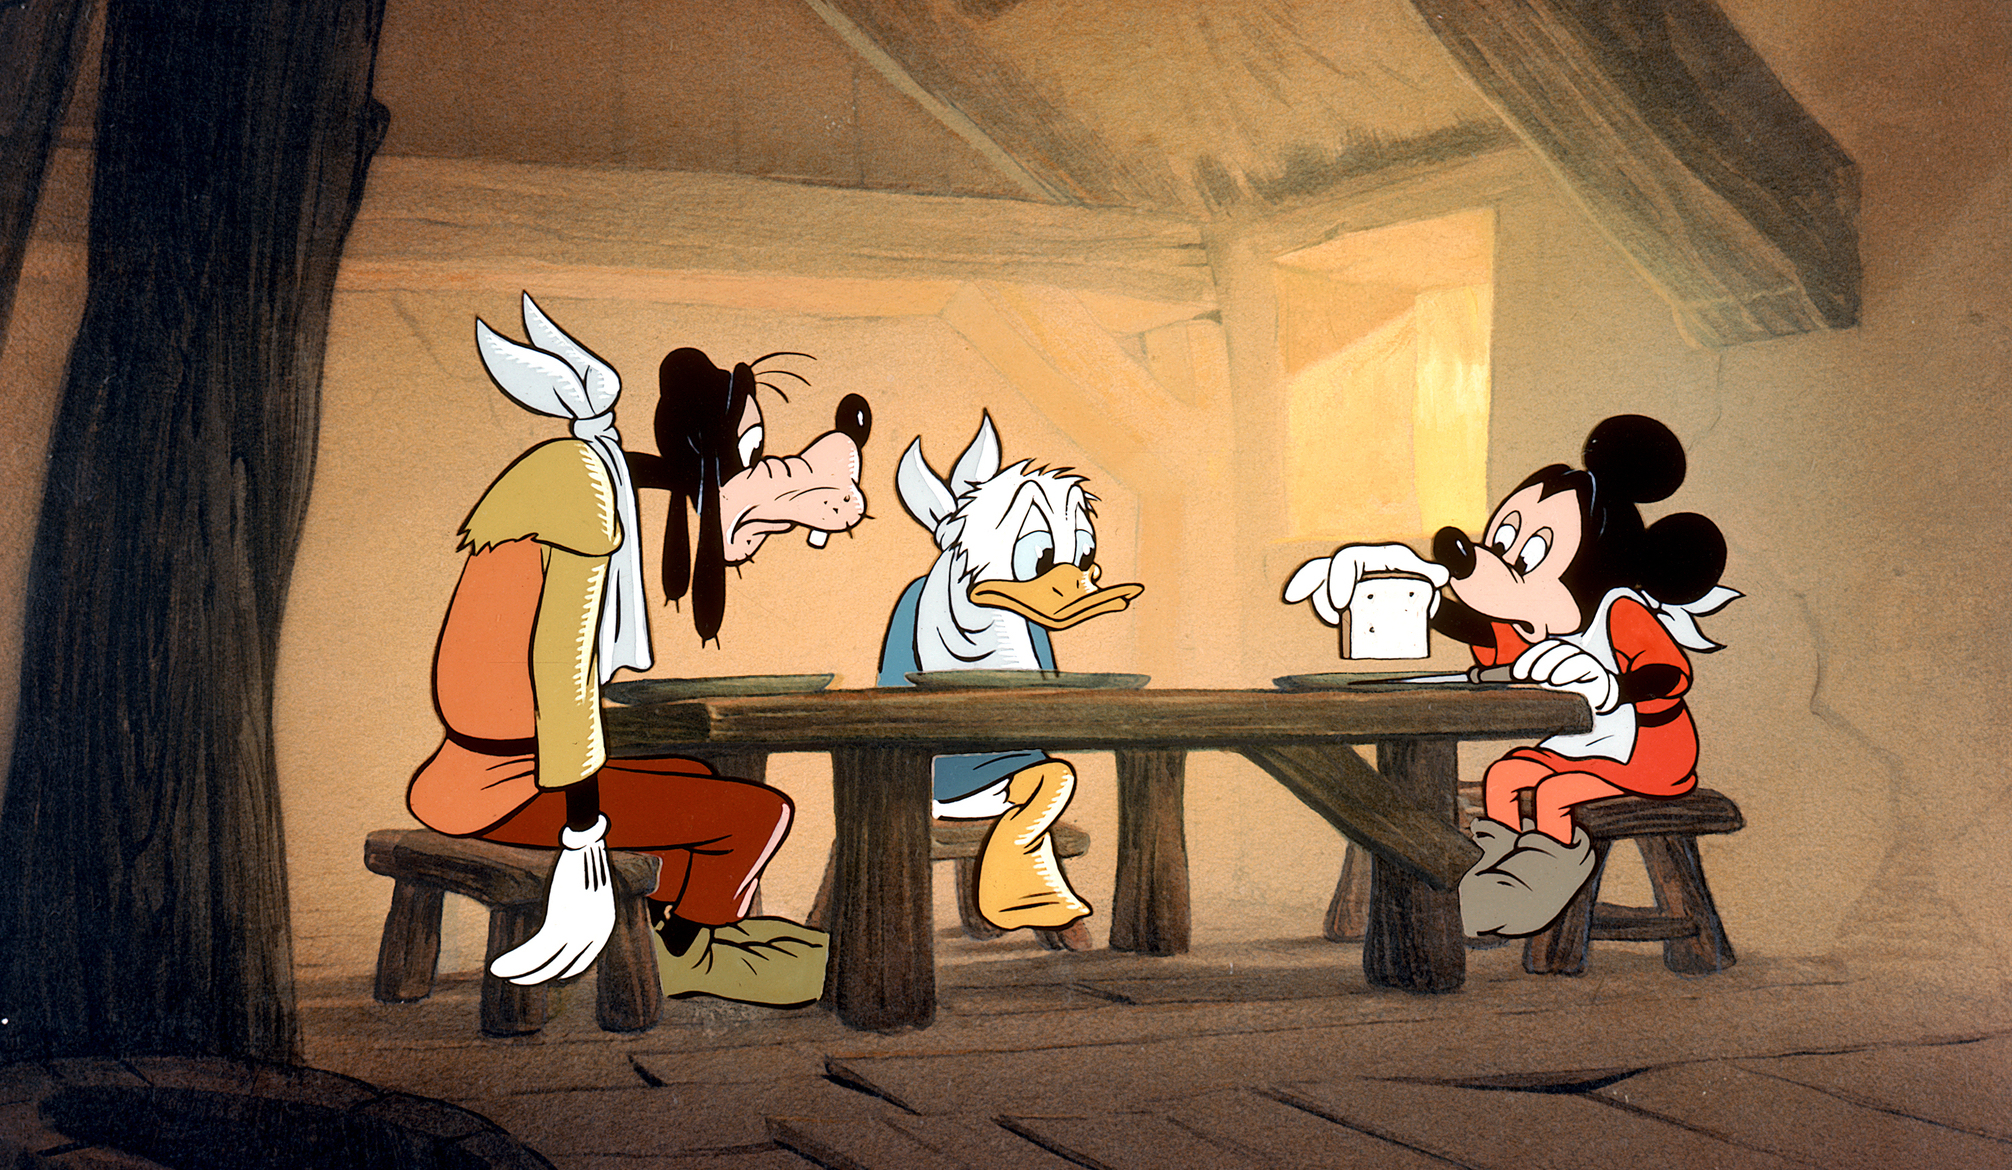 In a scene from the 1947 short Mickey and the Beanstalk, Goofy, Donald Duck, and Mickey Mouse slump hungrily over a wooden table in a bare room, wearing napkins around their necks and getting ready to split a single bean three ways